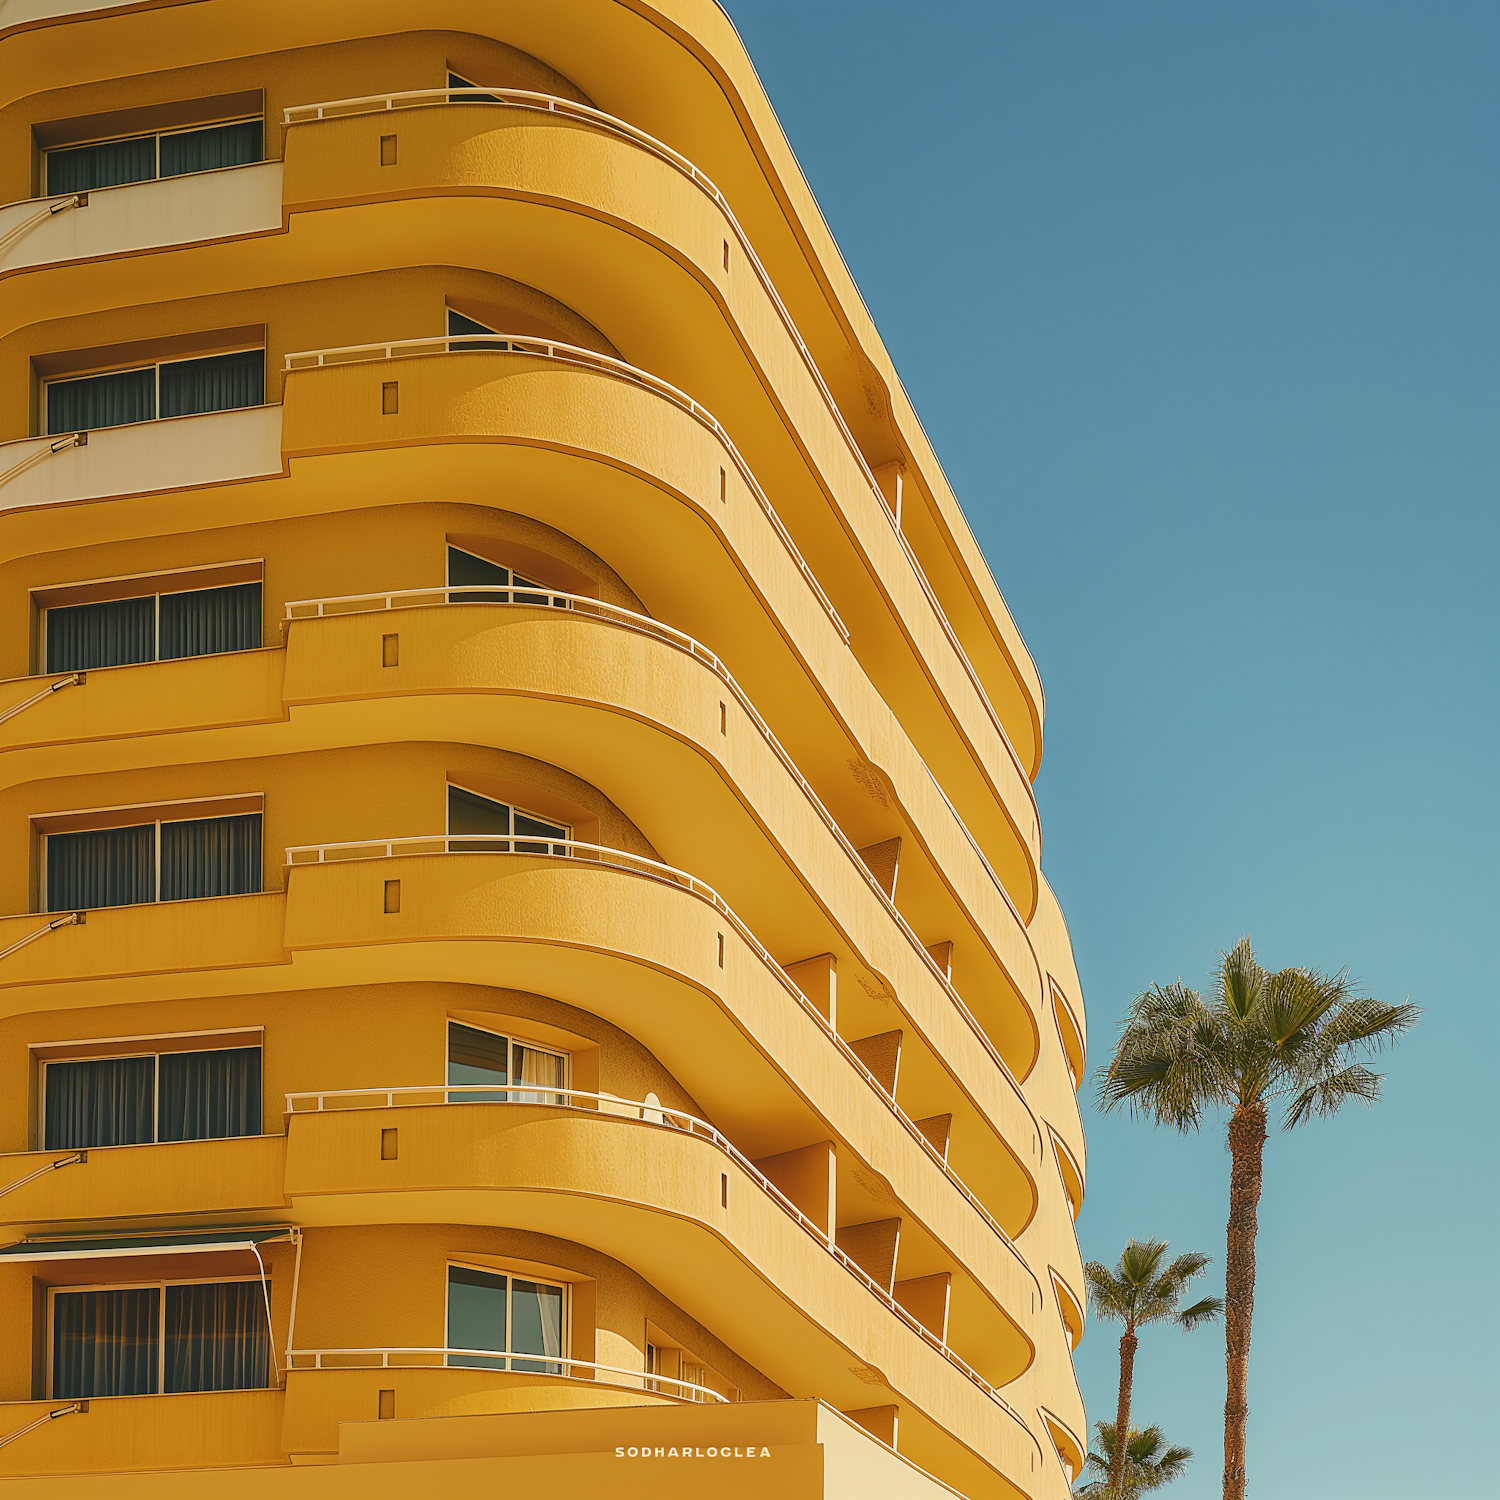 Curvilinear Yellow Architecture with Palm Trees